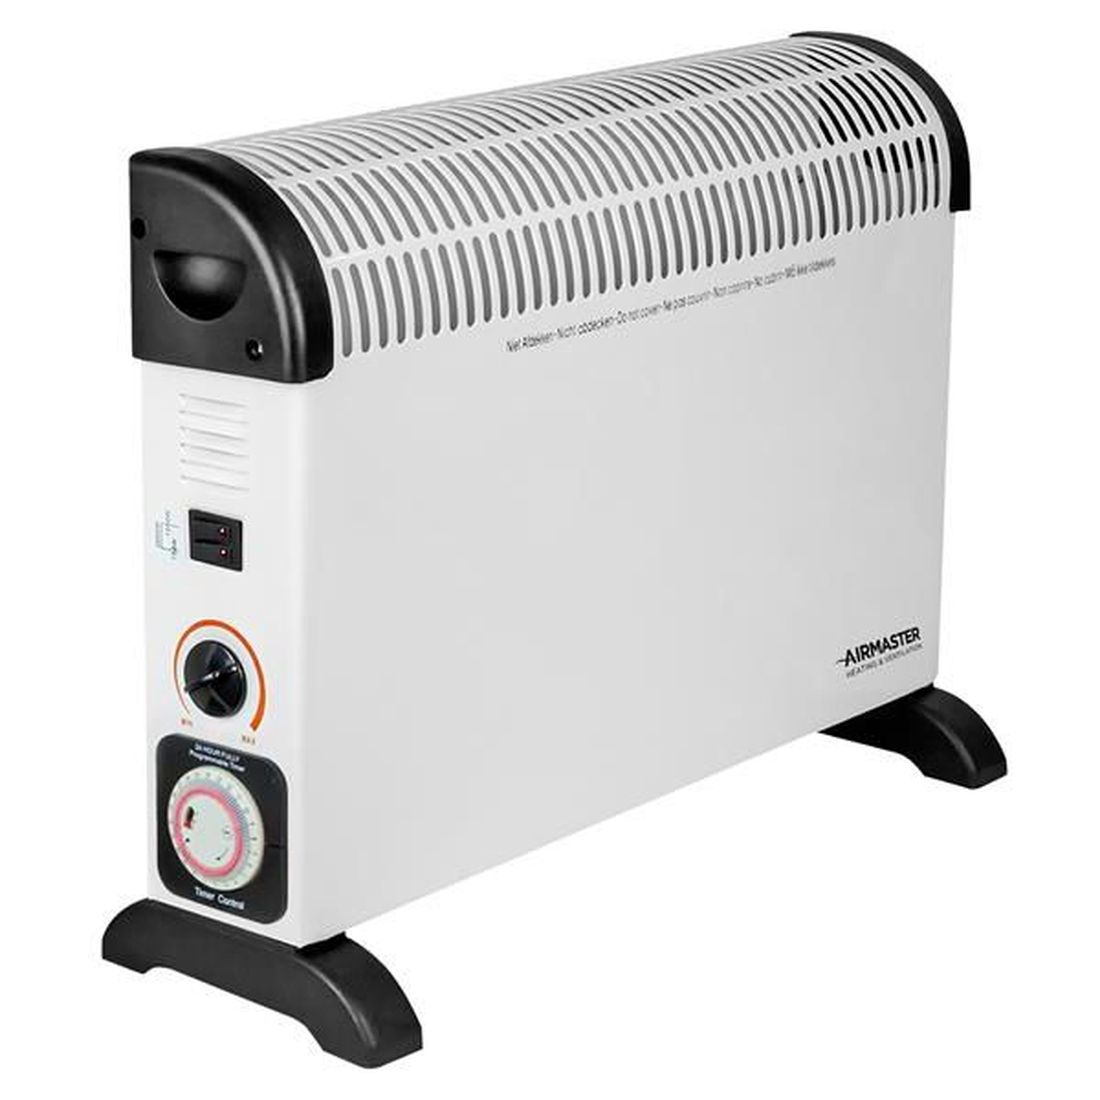 Airmaster Convector Heater with Timer 2.0kW 